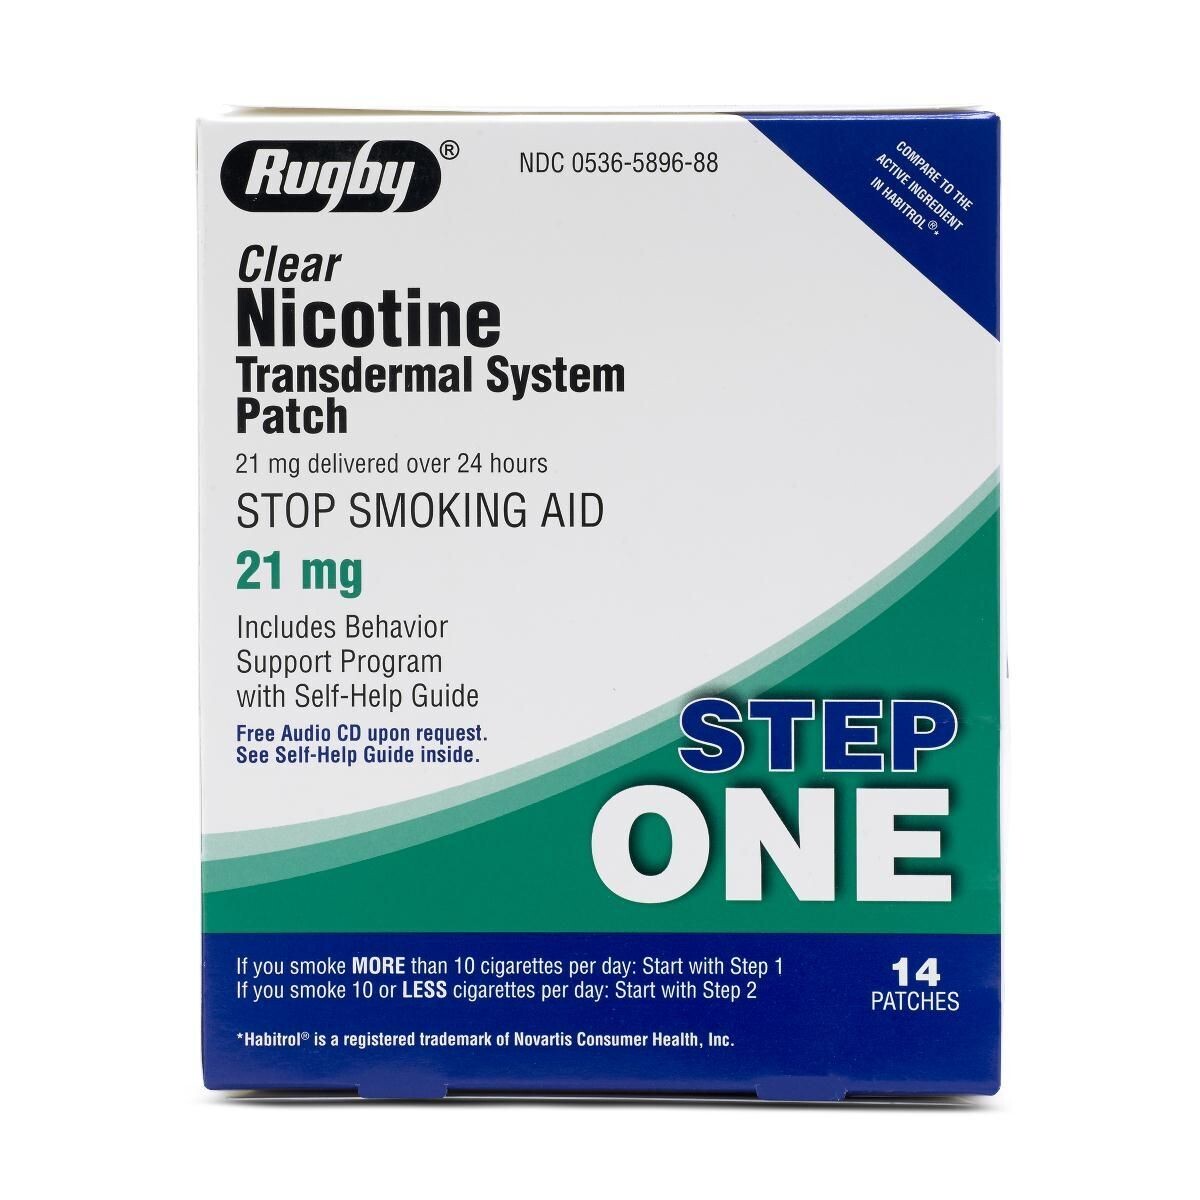 Clear Nicotine Transdermal System Patch (21 MG)